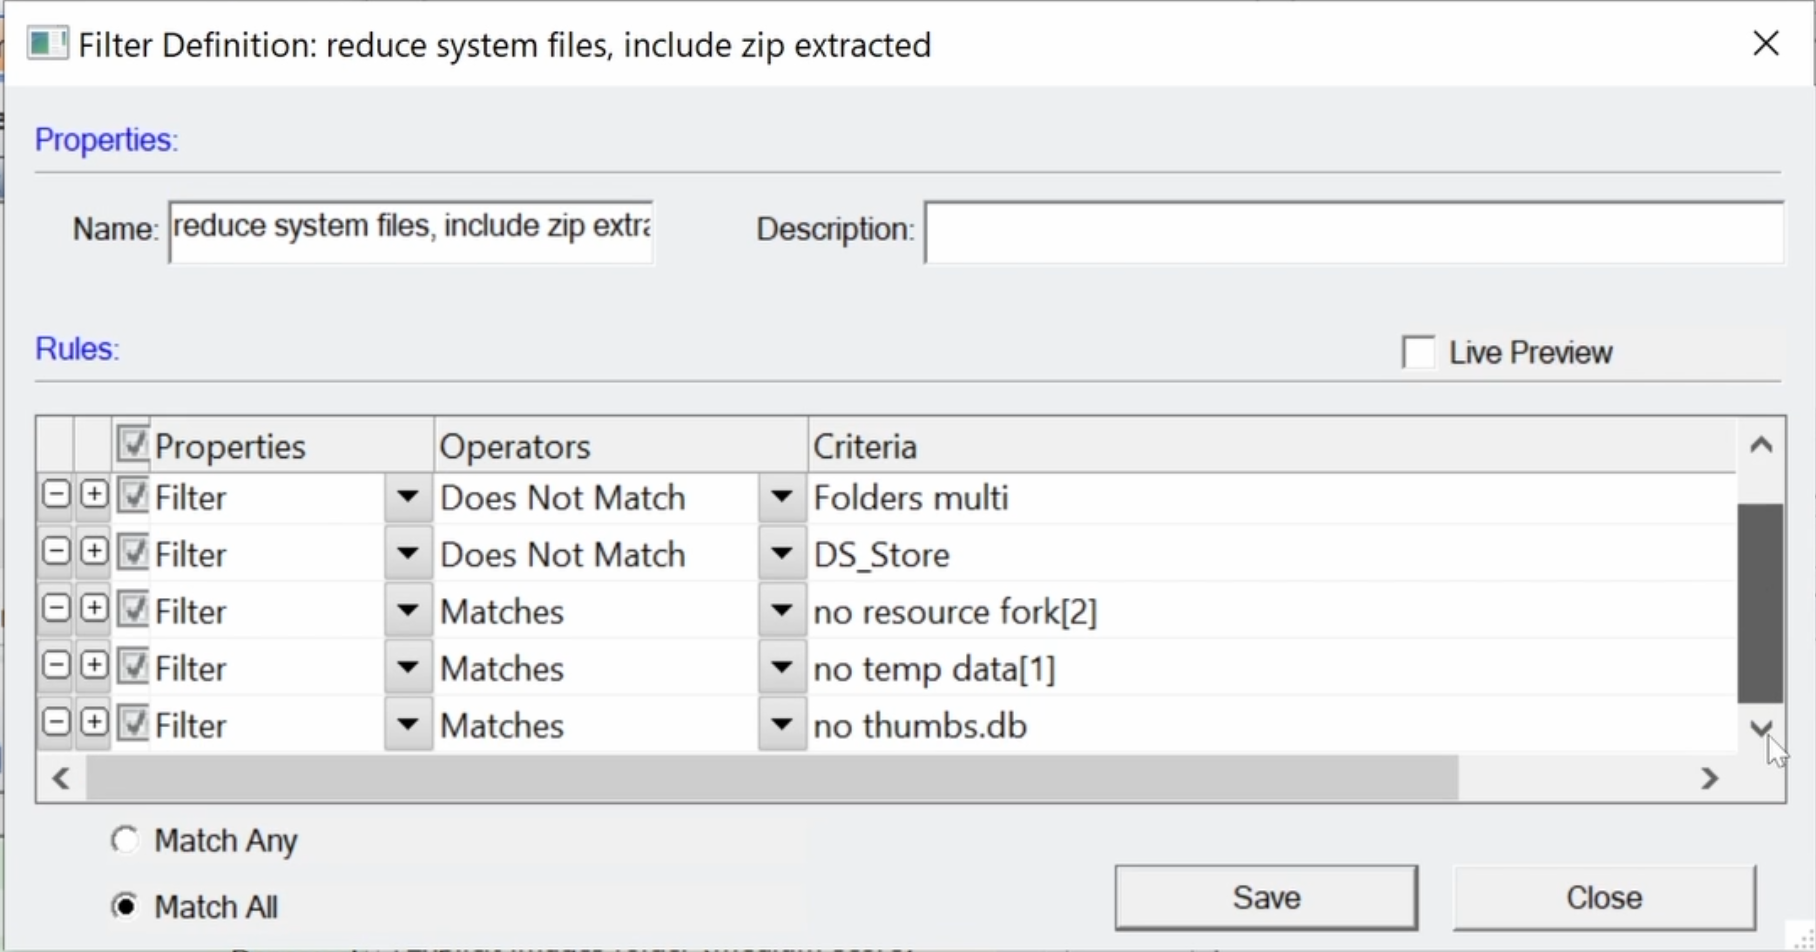 Filter Definition window displaying "include zip extracted" filter